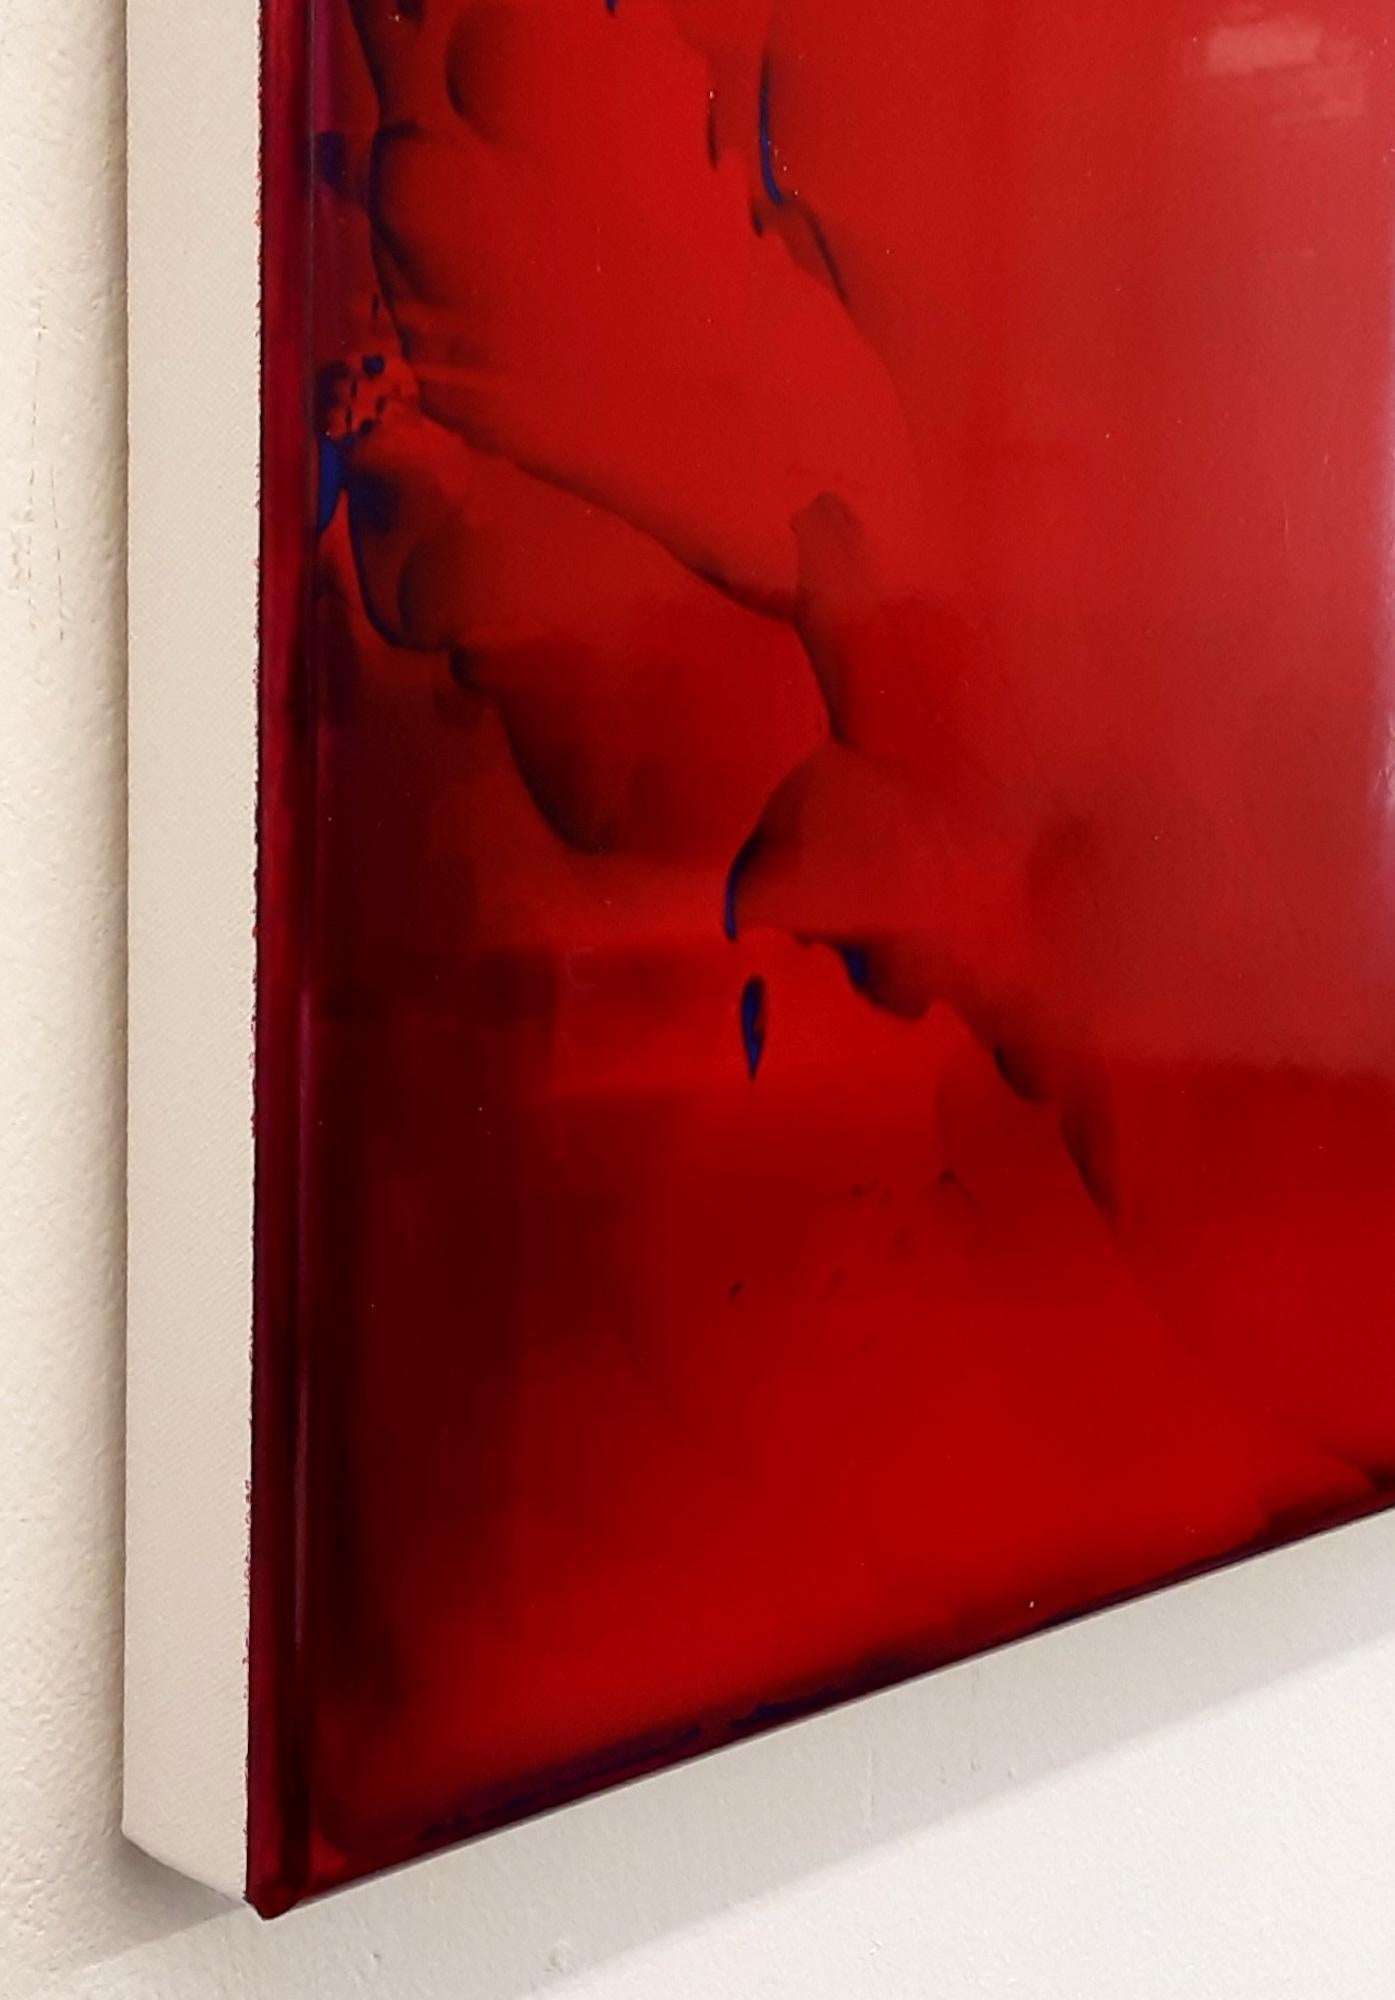 Resonance (3/21) by James Lumsden - Abstract colour painting, deep red For Sale 5